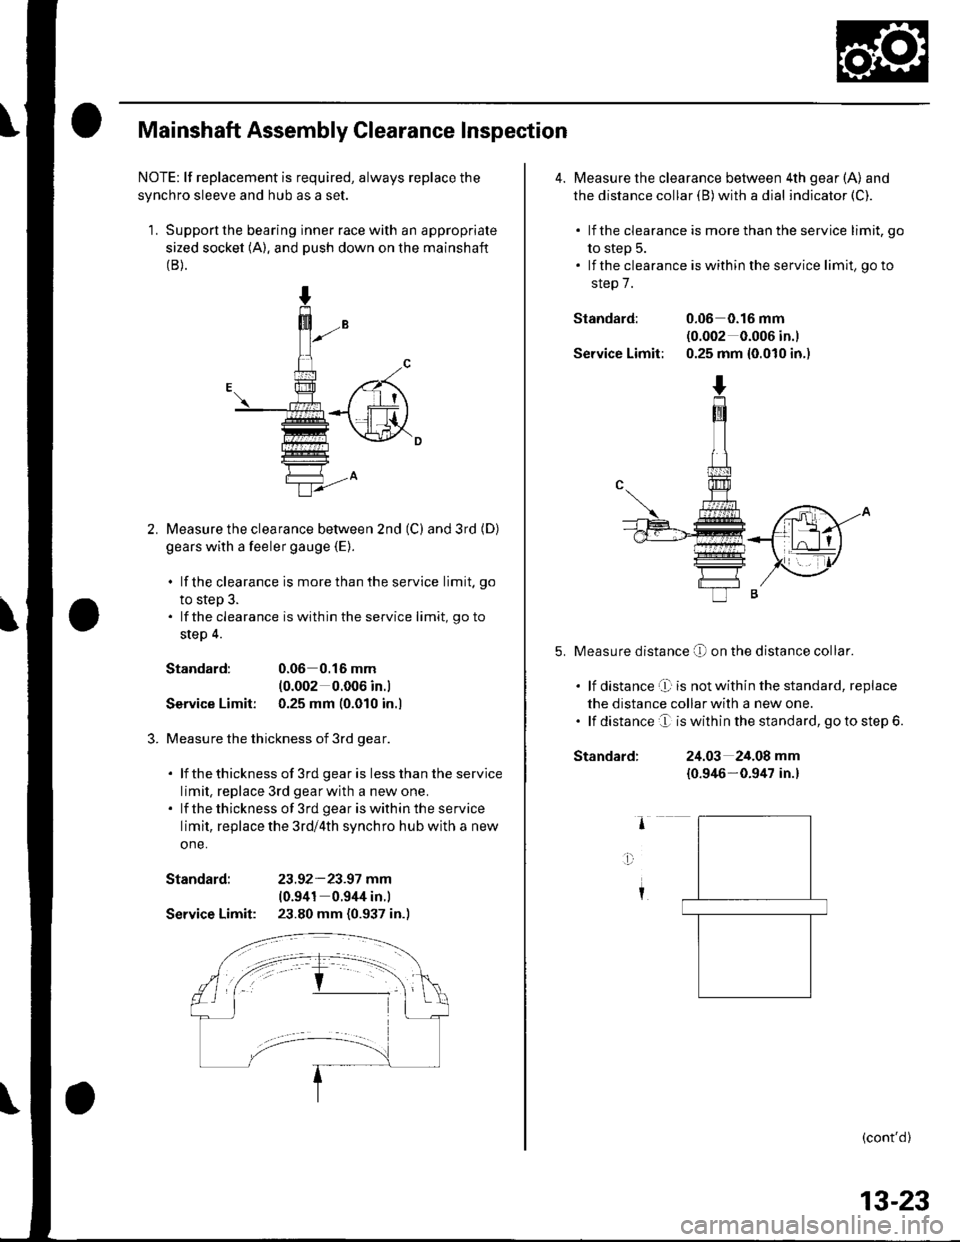 HONDA CIVIC 2003 7.G Workshop Manual Mainshaft Assembly Clearance Inspection
NOTE: lf replacement is required, always replace the
synchro sleeve and hub as a set.
1. Support the bearing inner race with an appropriate
sized socket (A). an